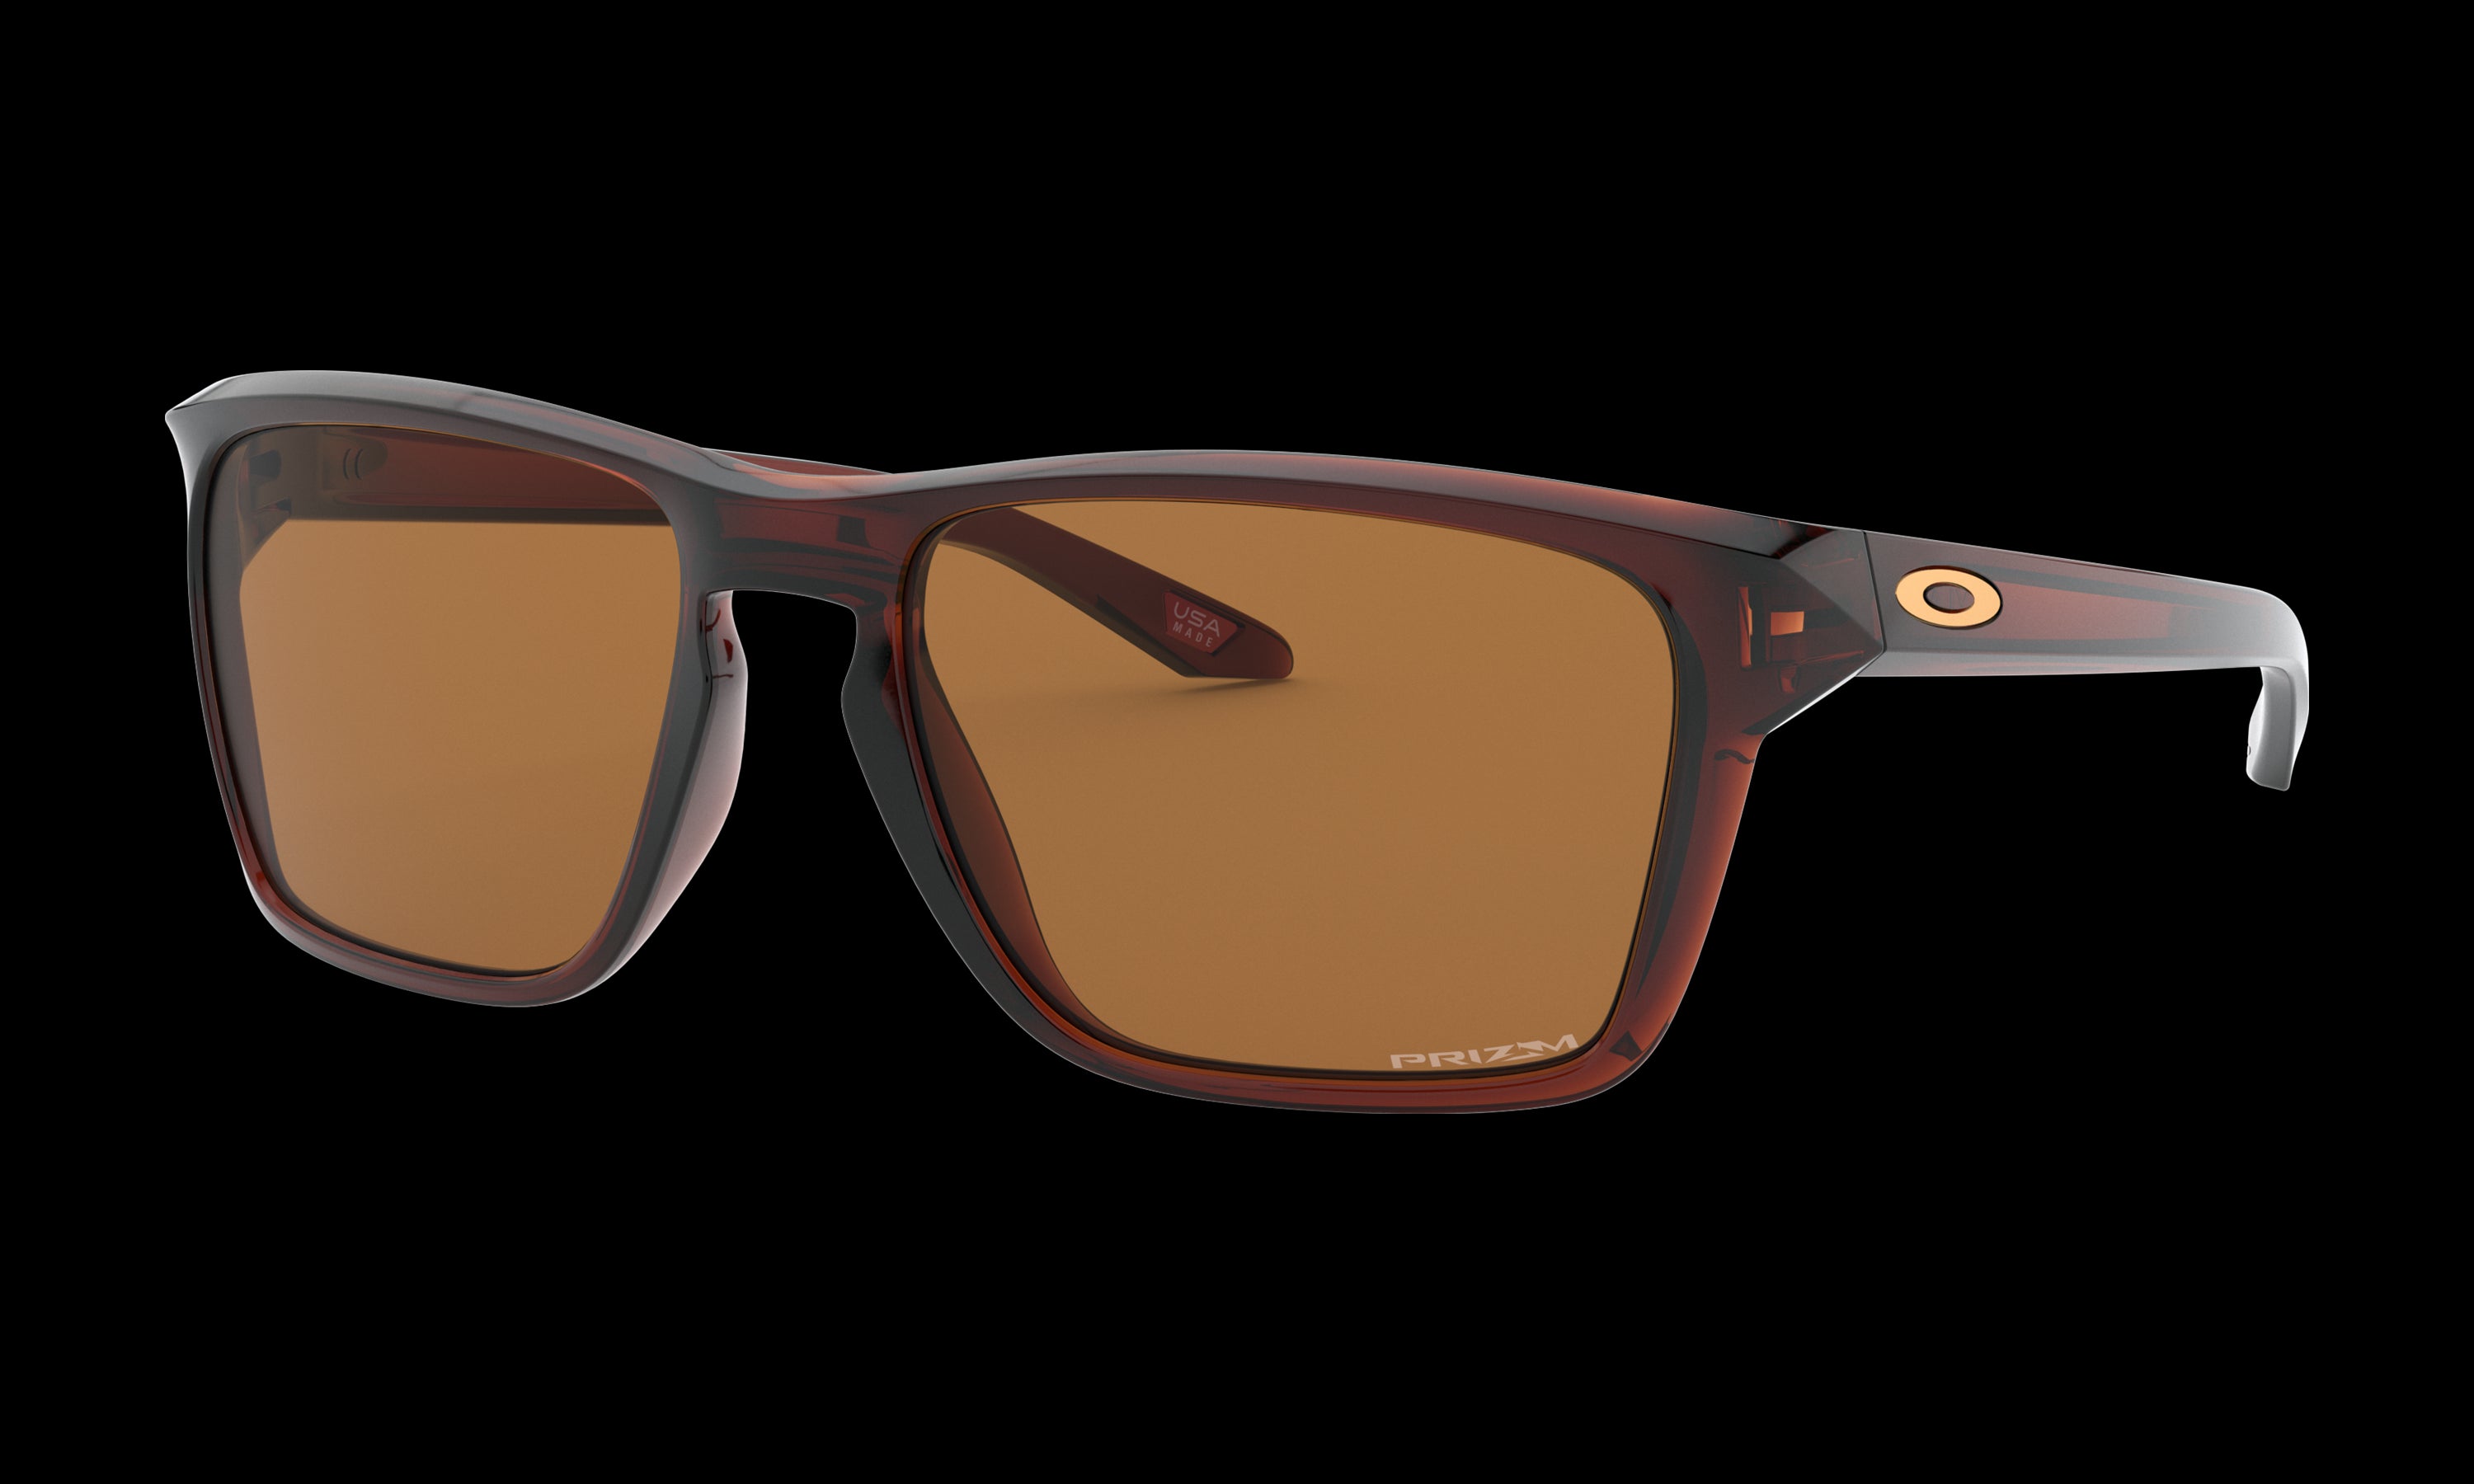 Men's Oakley Sylas Sunglasses in Polished Rootbeer Prizm Bronze